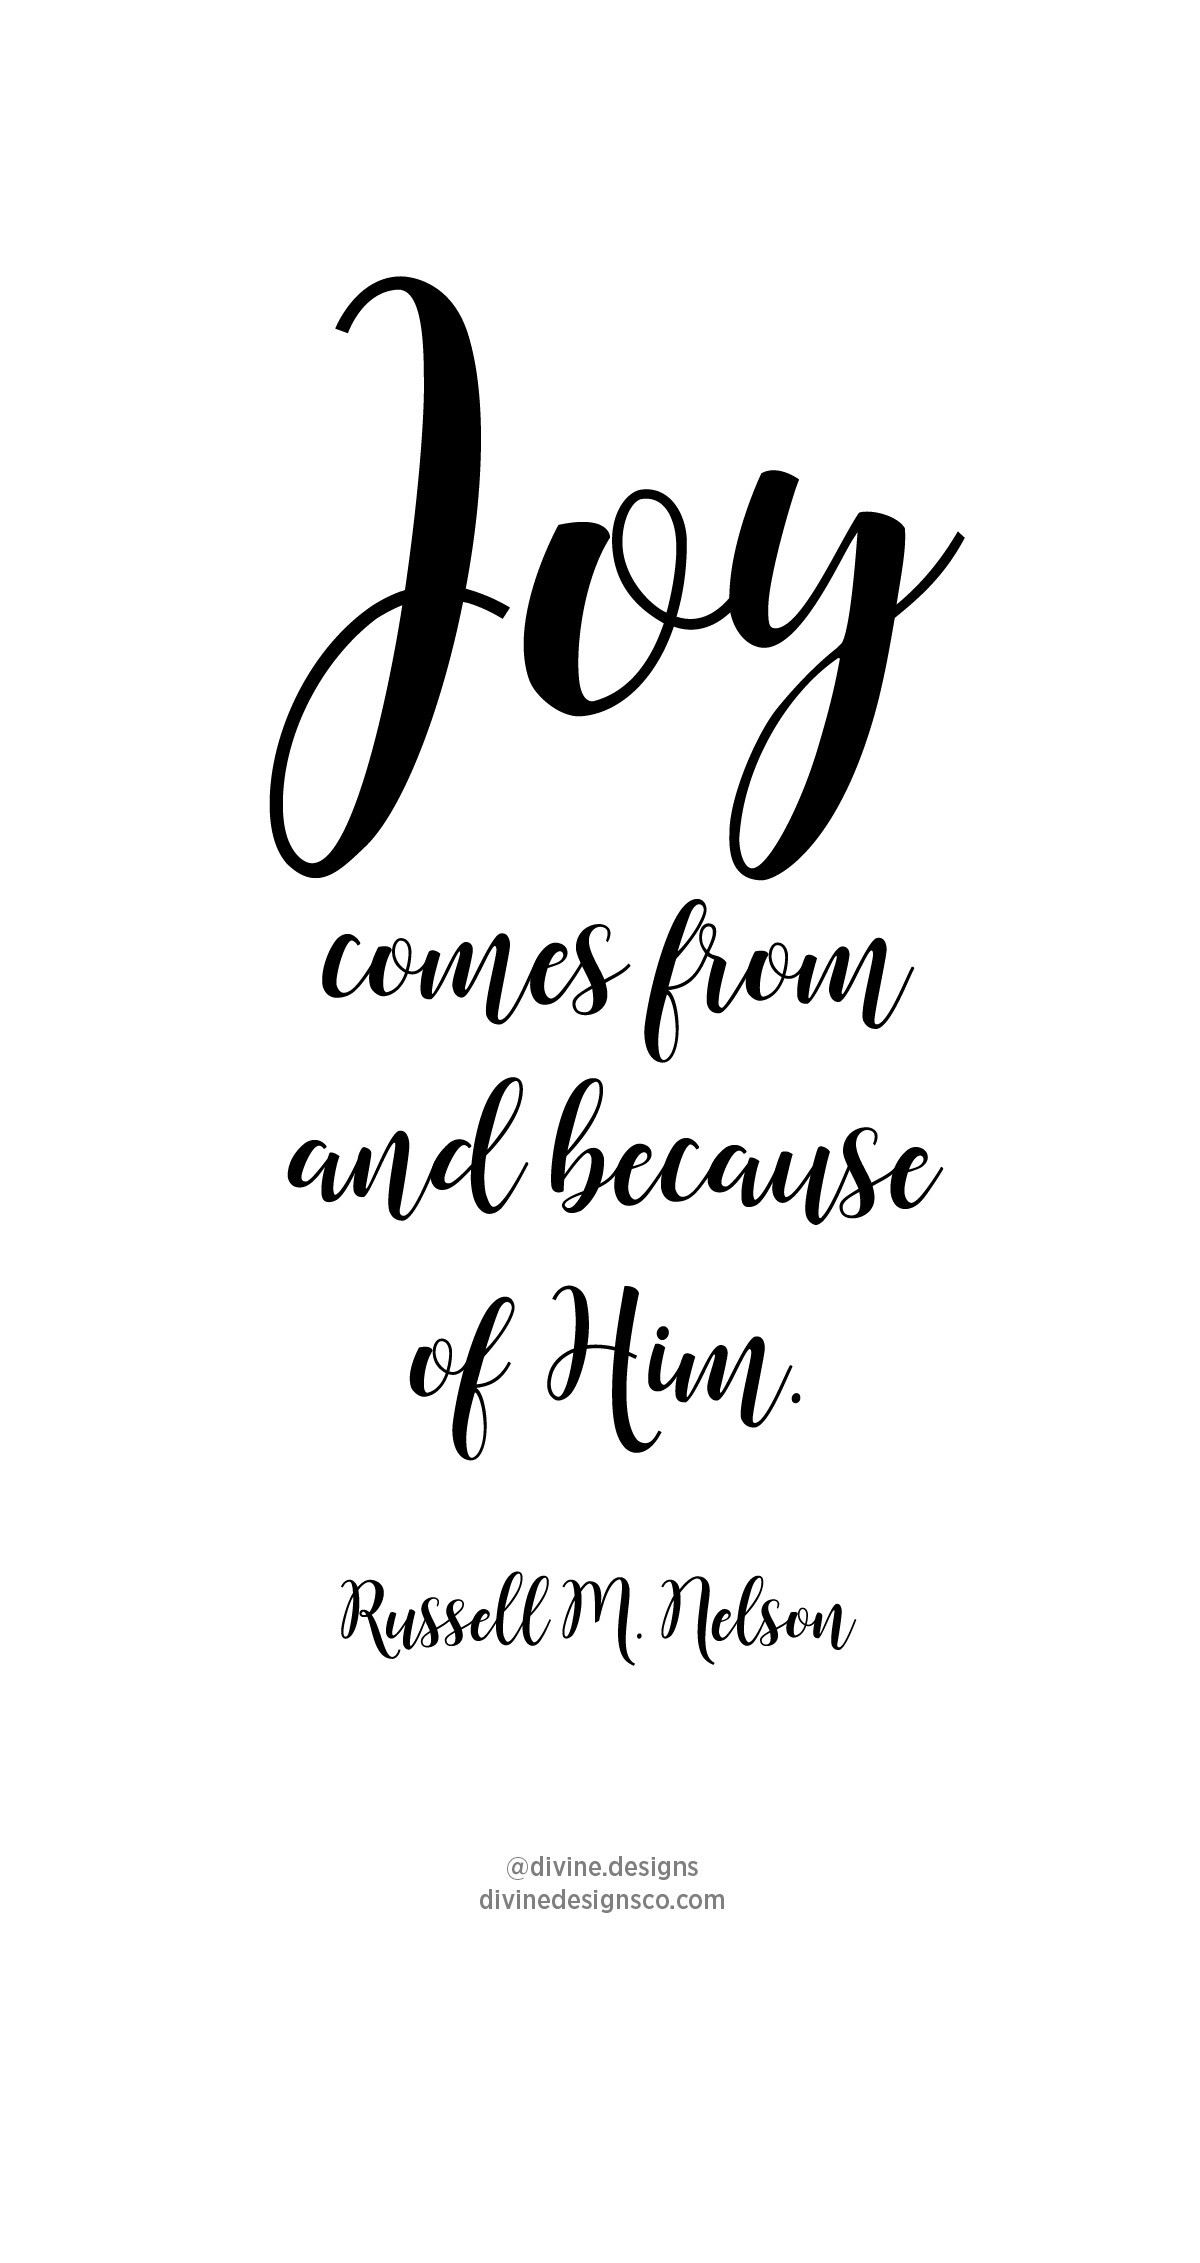 Christmas Joy Quotes
 Joy es from and because of Him Russell M Nelson LDS